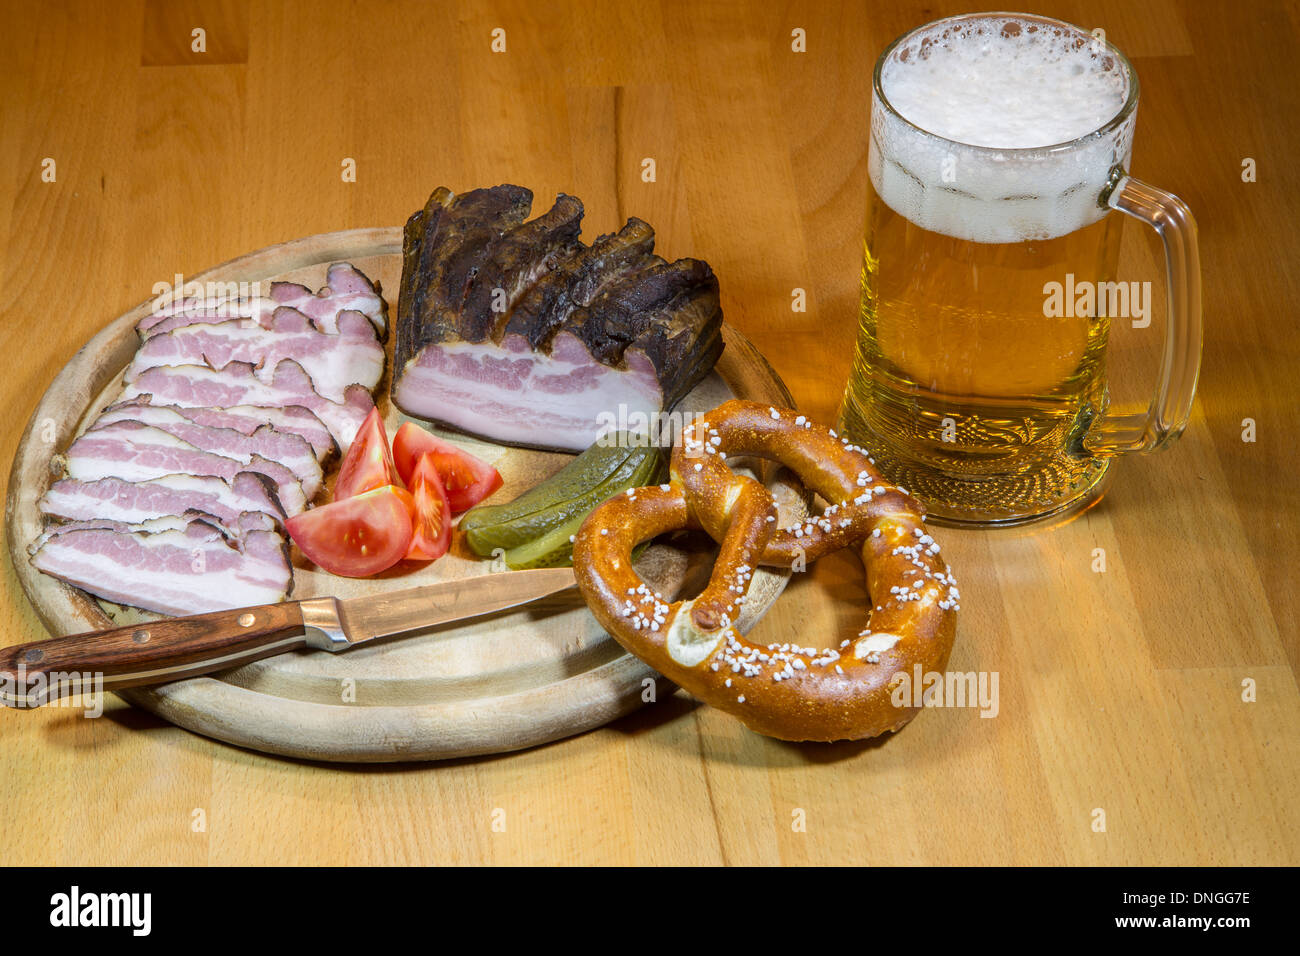 Smoked pork with a Lower Bavarian specialty beer and Pretzel Stock Photo